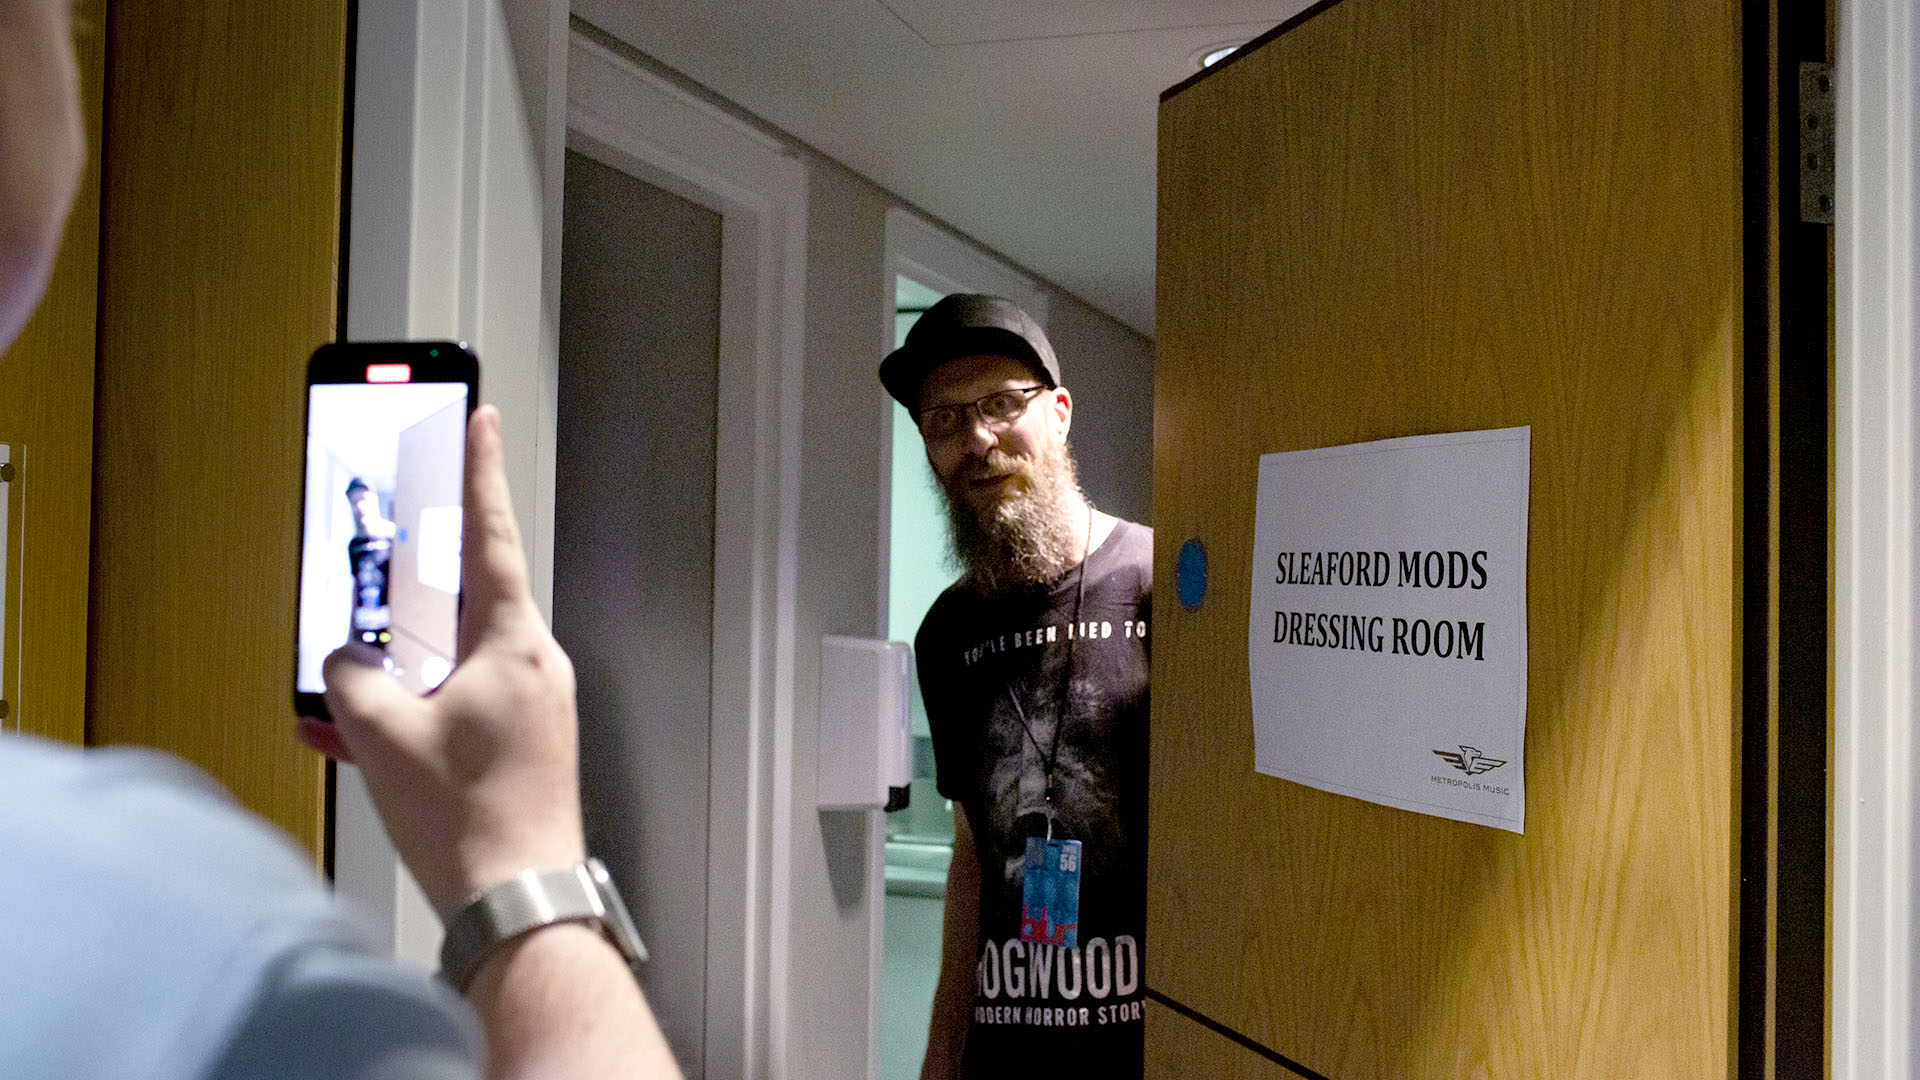 Sleaford Mods in their dressing room at Wembley